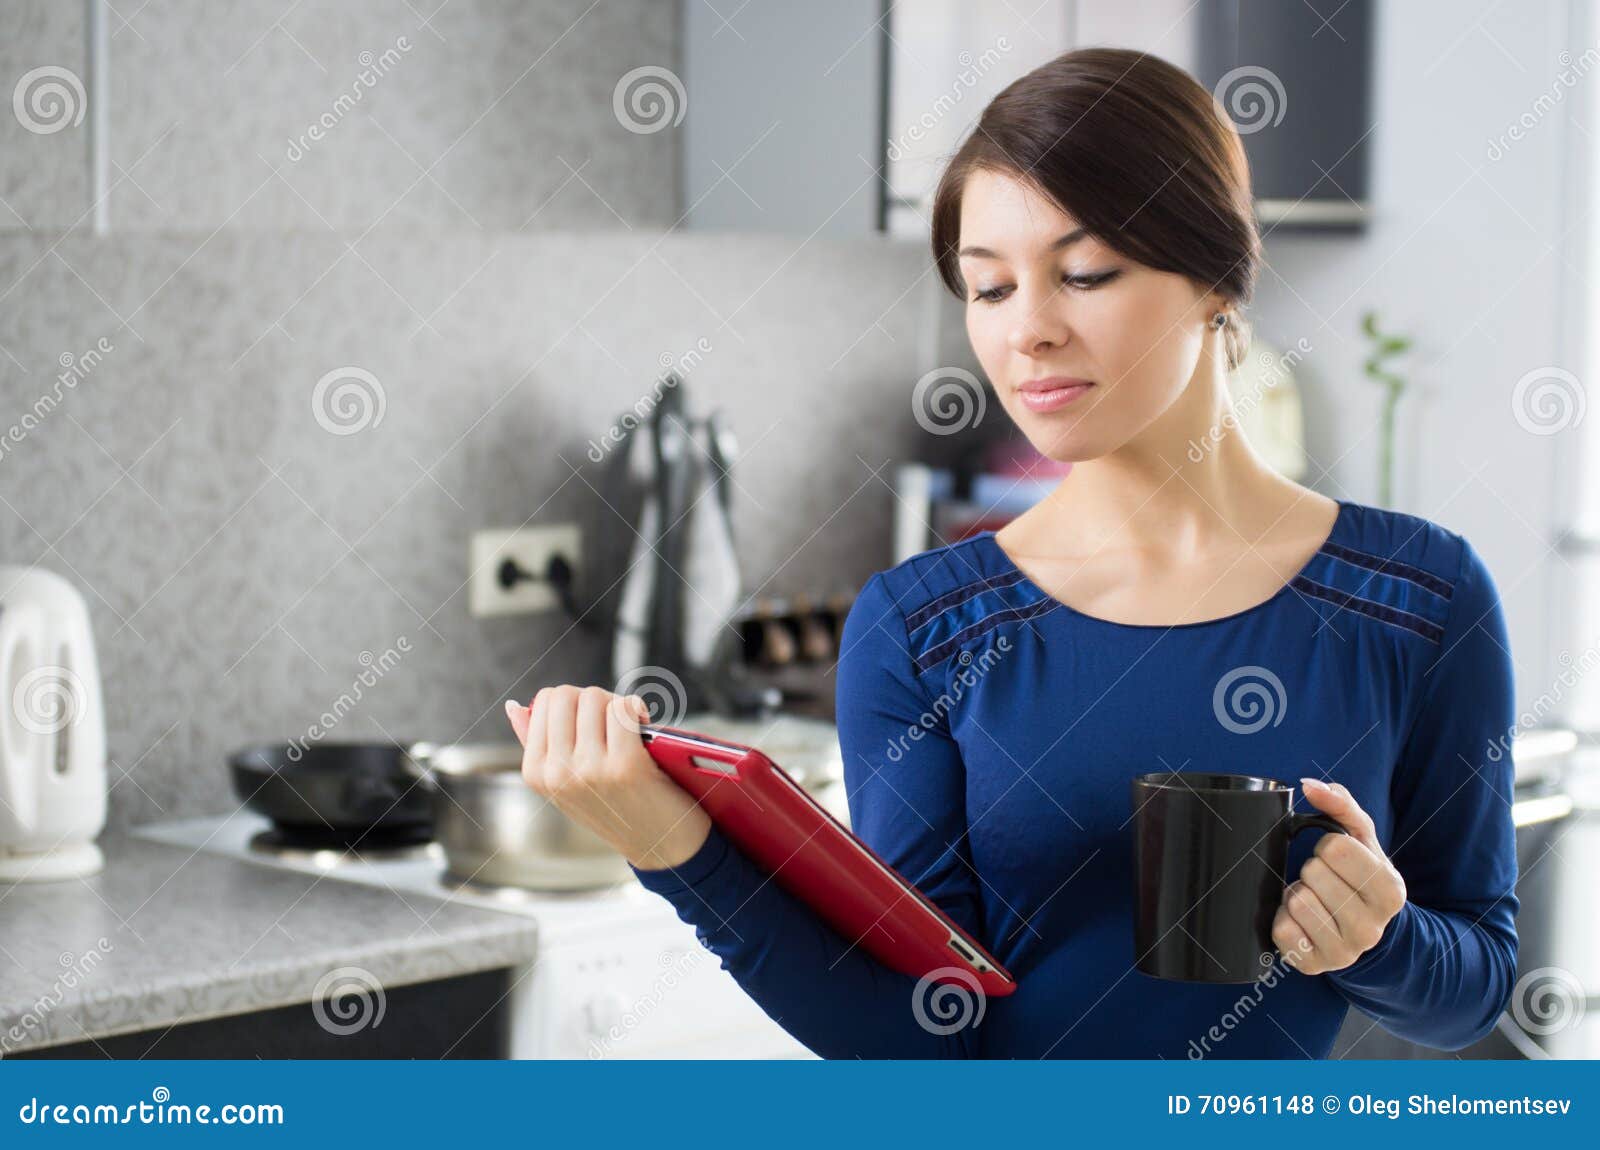 Morning housewife. Portrait of young attractive caucasian brunette housewife at kitchen. Morning with cup of coffee and tablet pc.